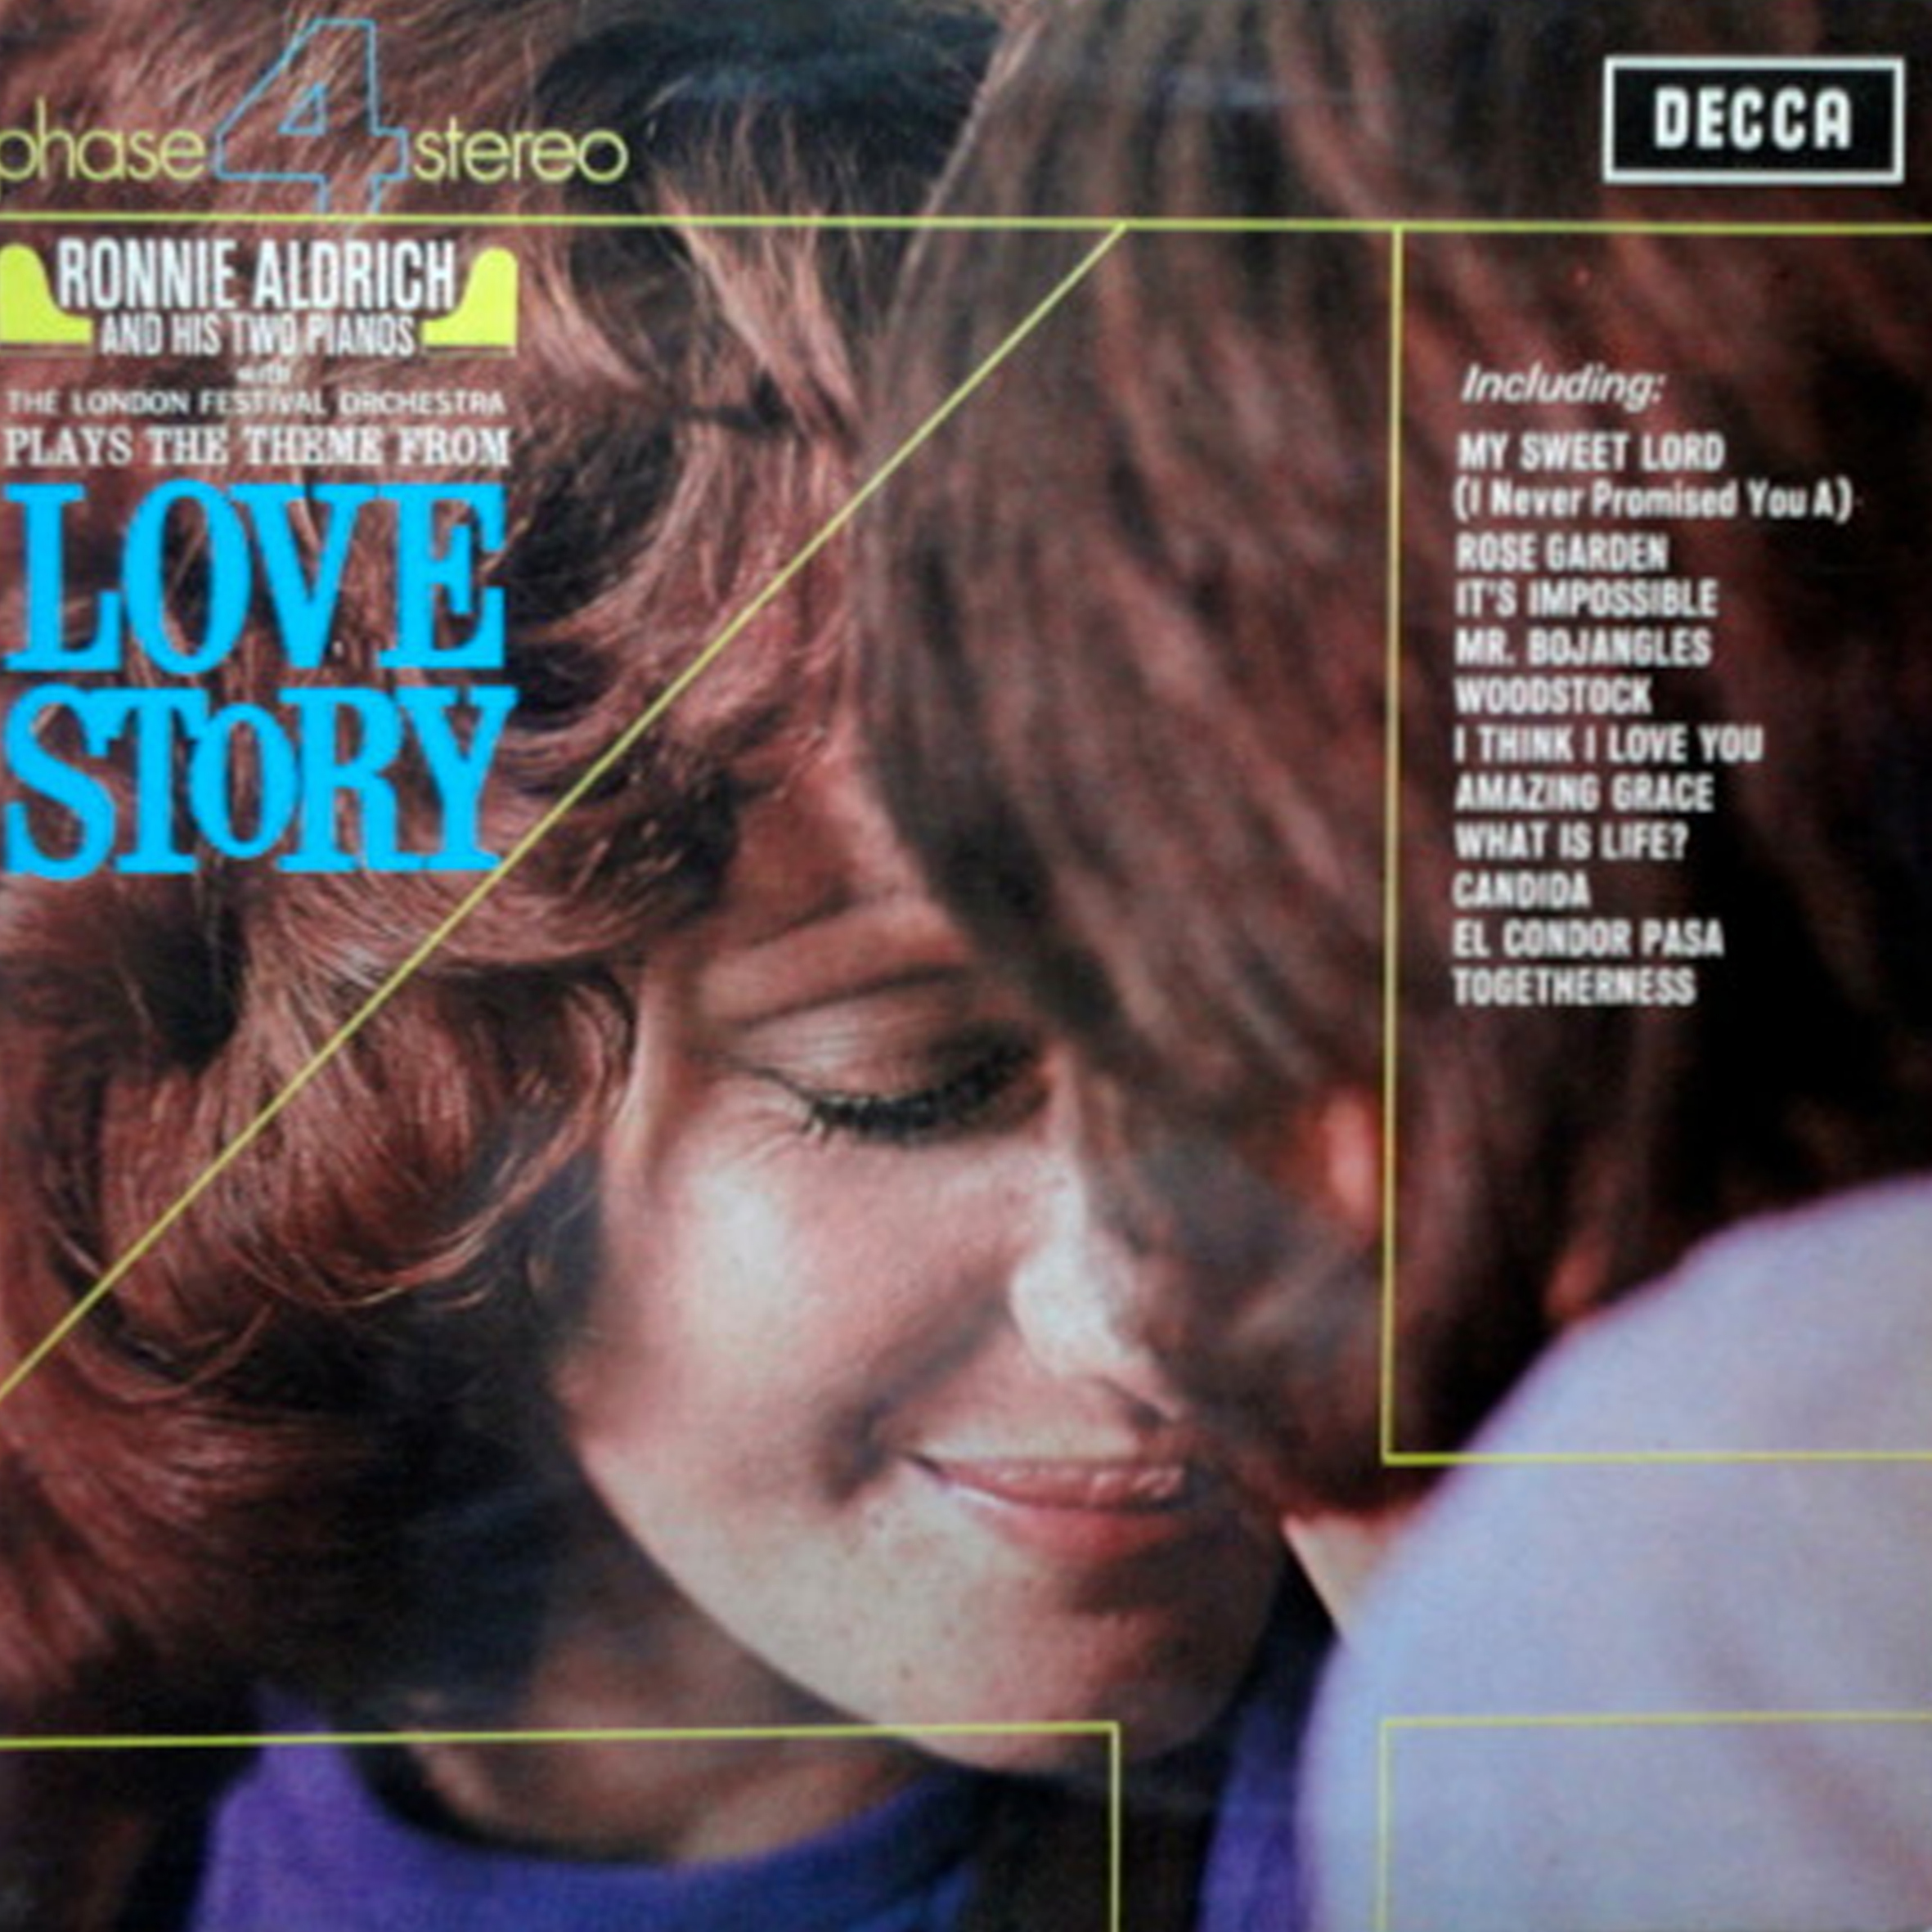 Vinil - Ronnie Aldrich And His Two Pianos - Love Story